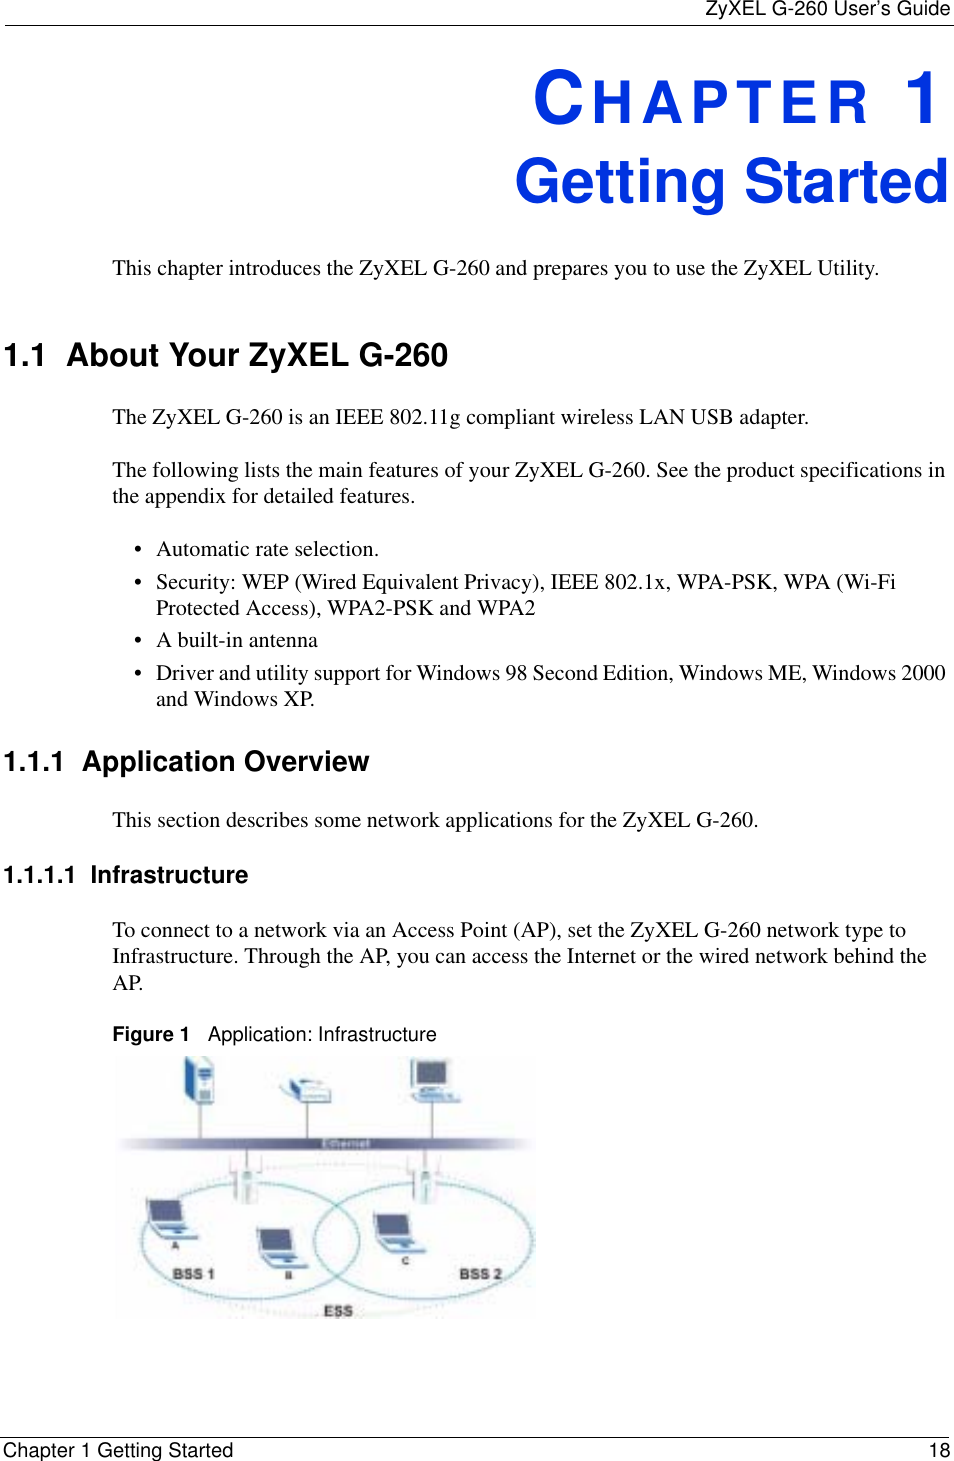 ZyXEL G-260 User’s GuideChapter 1 Getting Started 18CHAPTER 1Getting StartedThis chapter introduces the ZyXEL G-260 and prepares you to use the ZyXEL Utility.1.1  About Your ZyXEL G-260    The ZyXEL G-260 is an IEEE 802.11g compliant wireless LAN USB adapter. The following lists the main features of your ZyXEL G-260. See the product specifications in the appendix for detailed features.• Automatic rate selection.• Security: WEP (Wired Equivalent Privacy), IEEE 802.1x, WPA-PSK, WPA (Wi-Fi Protected Access), WPA2-PSK and WPA2 • A built-in antenna• Driver and utility support for Windows 98 Second Edition, Windows ME, Windows 2000 and Windows XP.1.1.1  Application OverviewThis section describes some network applications for the ZyXEL G-260. 1.1.1.1  Infrastructure To connect to a network via an Access Point (AP), set the ZyXEL G-260 network type to Infrastructure. Through the AP, you can access the Internet or the wired network behind the AP.  Figure 1   Application: Infrastructure 